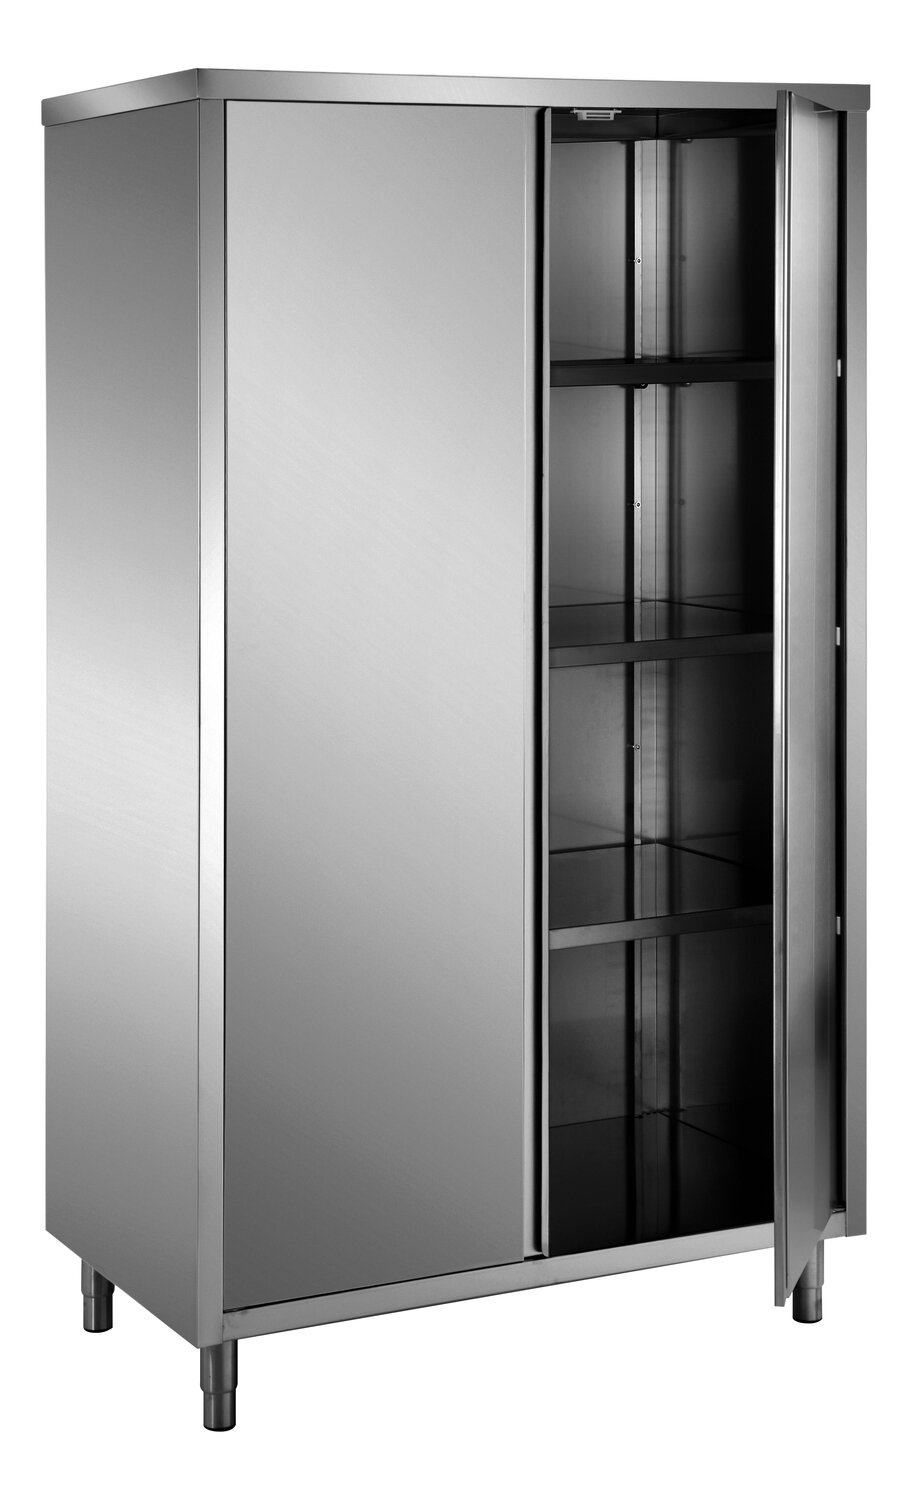 SARO Stainless steel storage cabinets with 2 hinged doors 1000x600 AISI 304